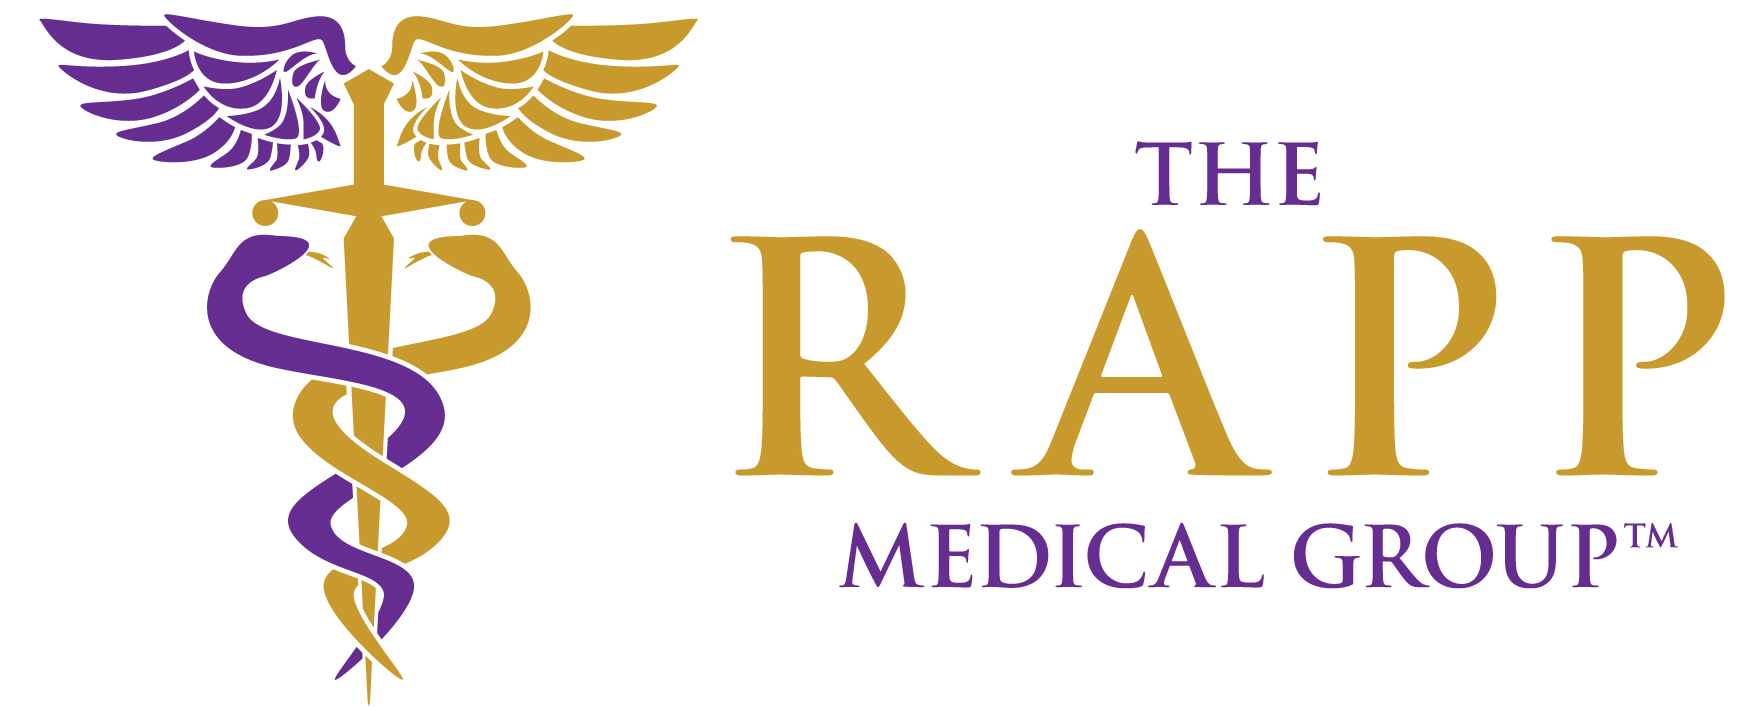 The Rapp Medical Group